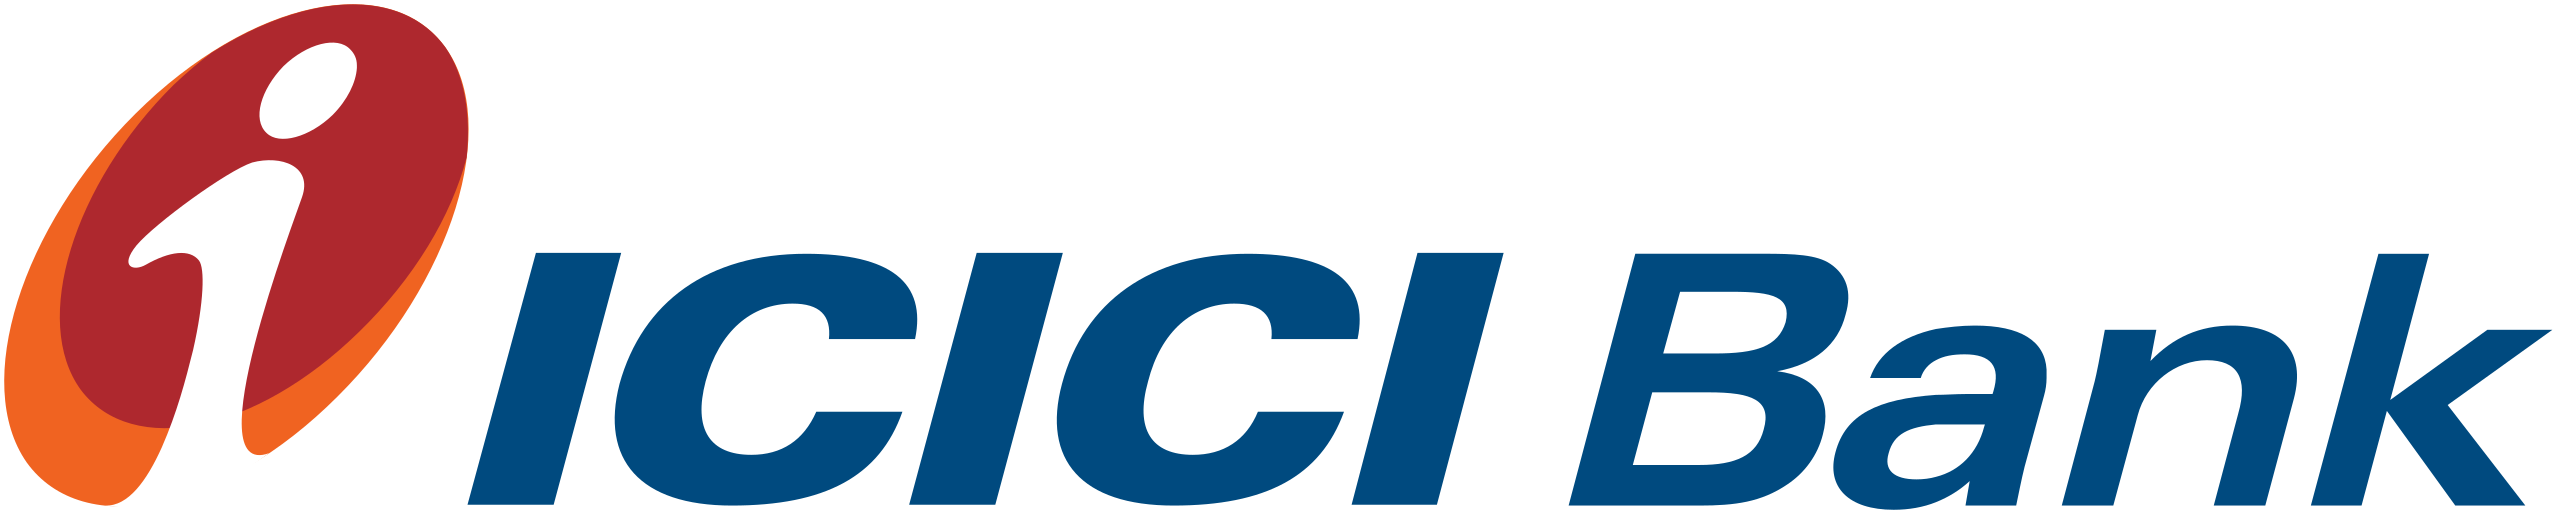 ICICI Bank - One of the Largest Private Bank